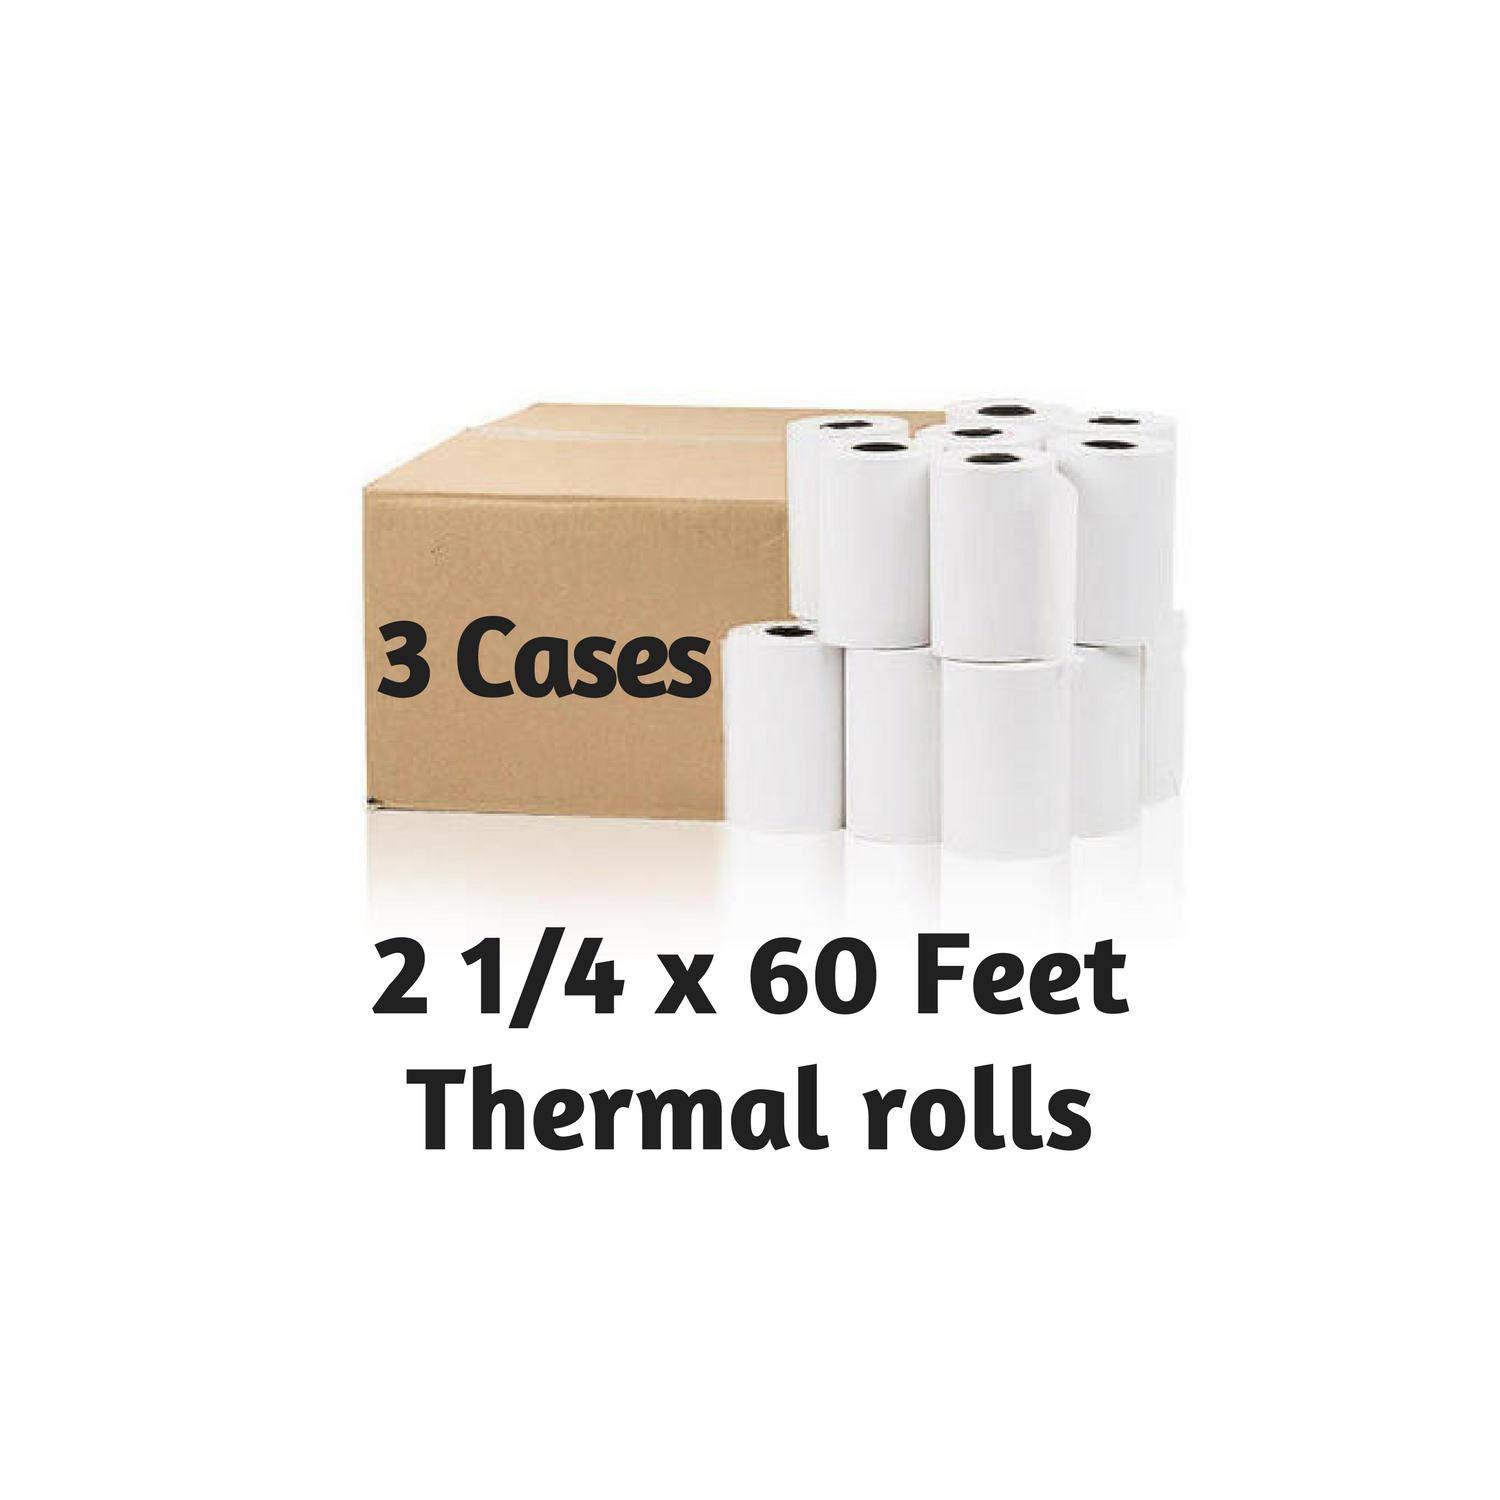 2 1/4" (58mm) x 60' Feet Thermal Paper Rolls (100 rolls/Case) 3 Cases - FREE SHIPPING